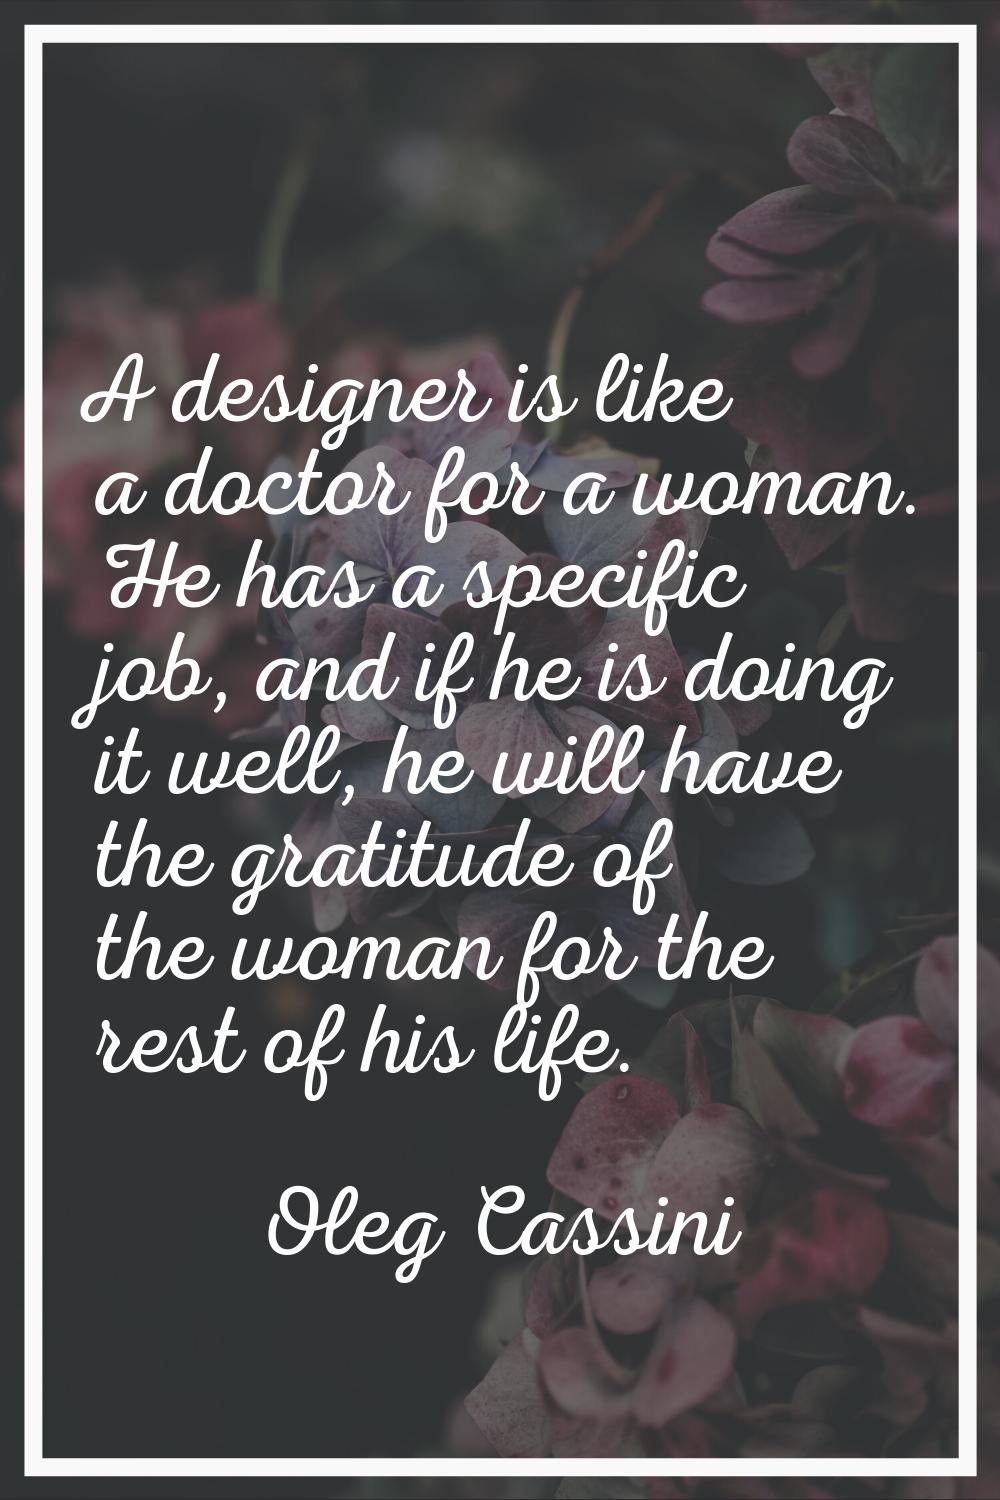 A designer is like a doctor for a woman. He has a specific job, and if he is doing it well, he will